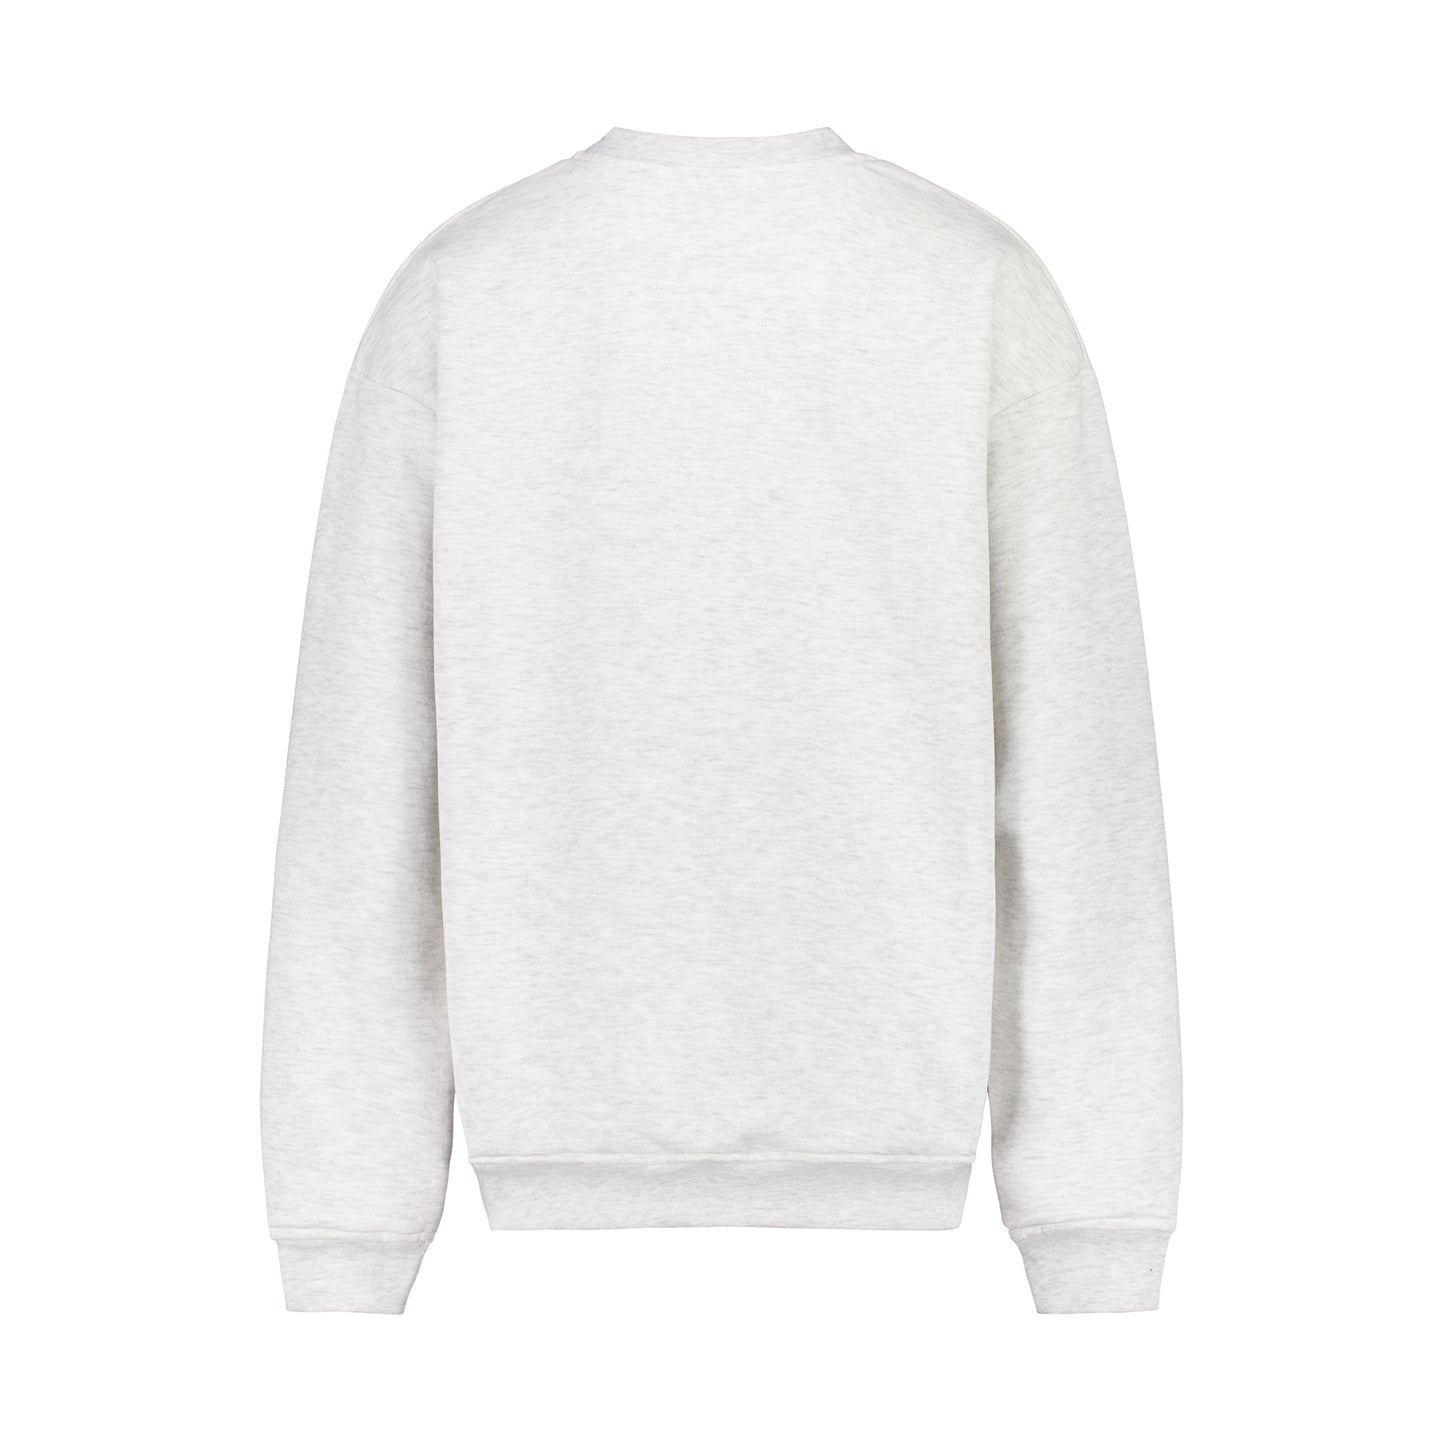 Unisex Relaxed Crew Neck Sweater White Marle